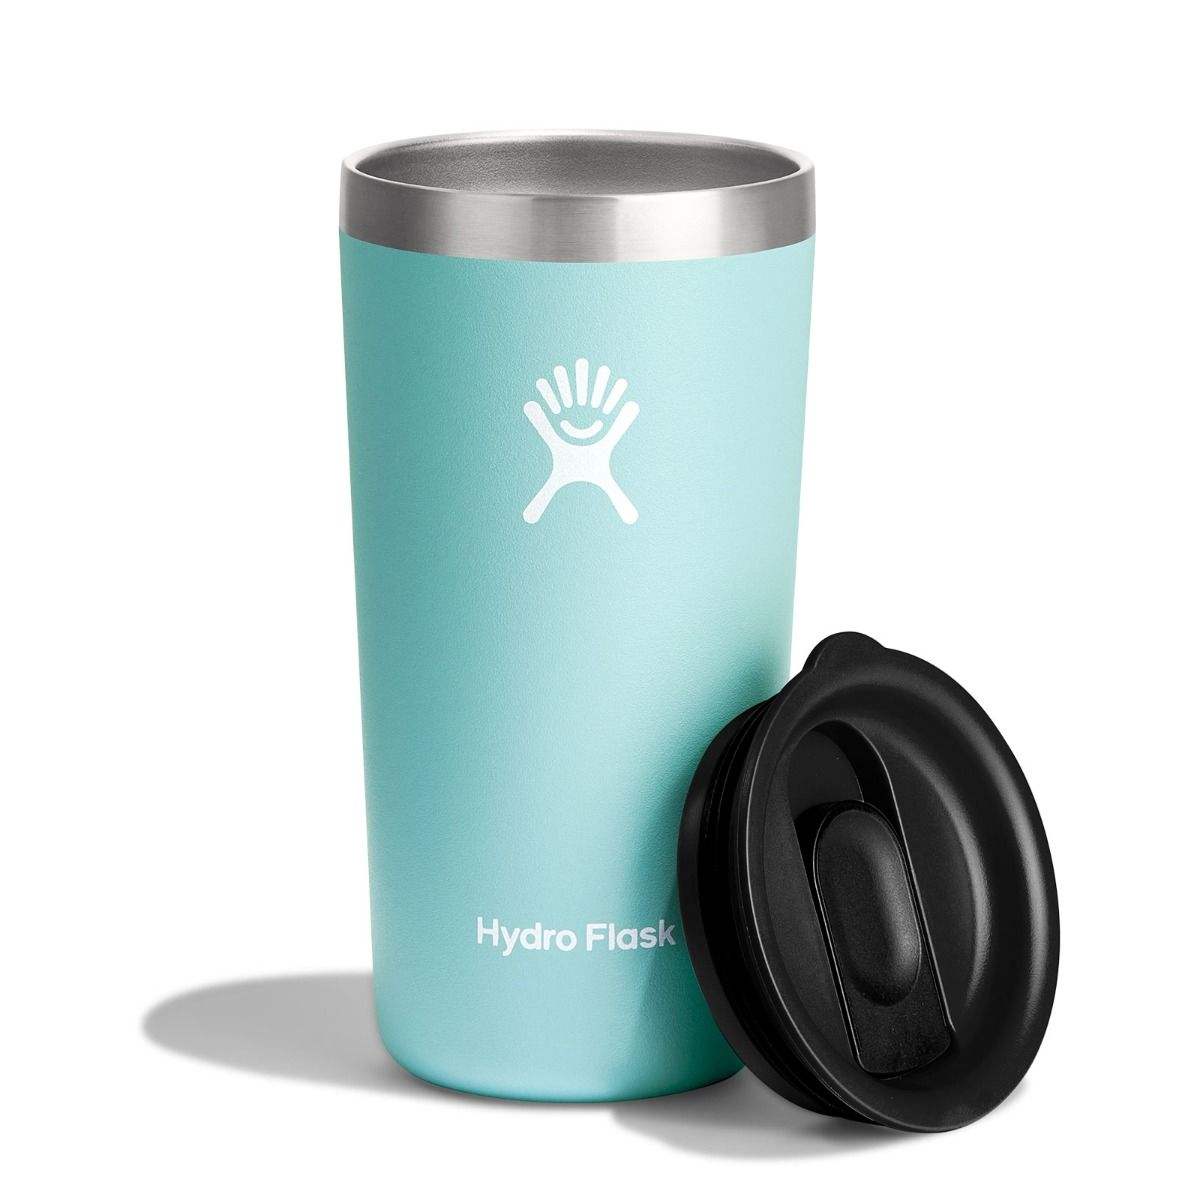 Hydro Flask 12oz Tumbler - The Luxury Promotional Gifts Company Limited